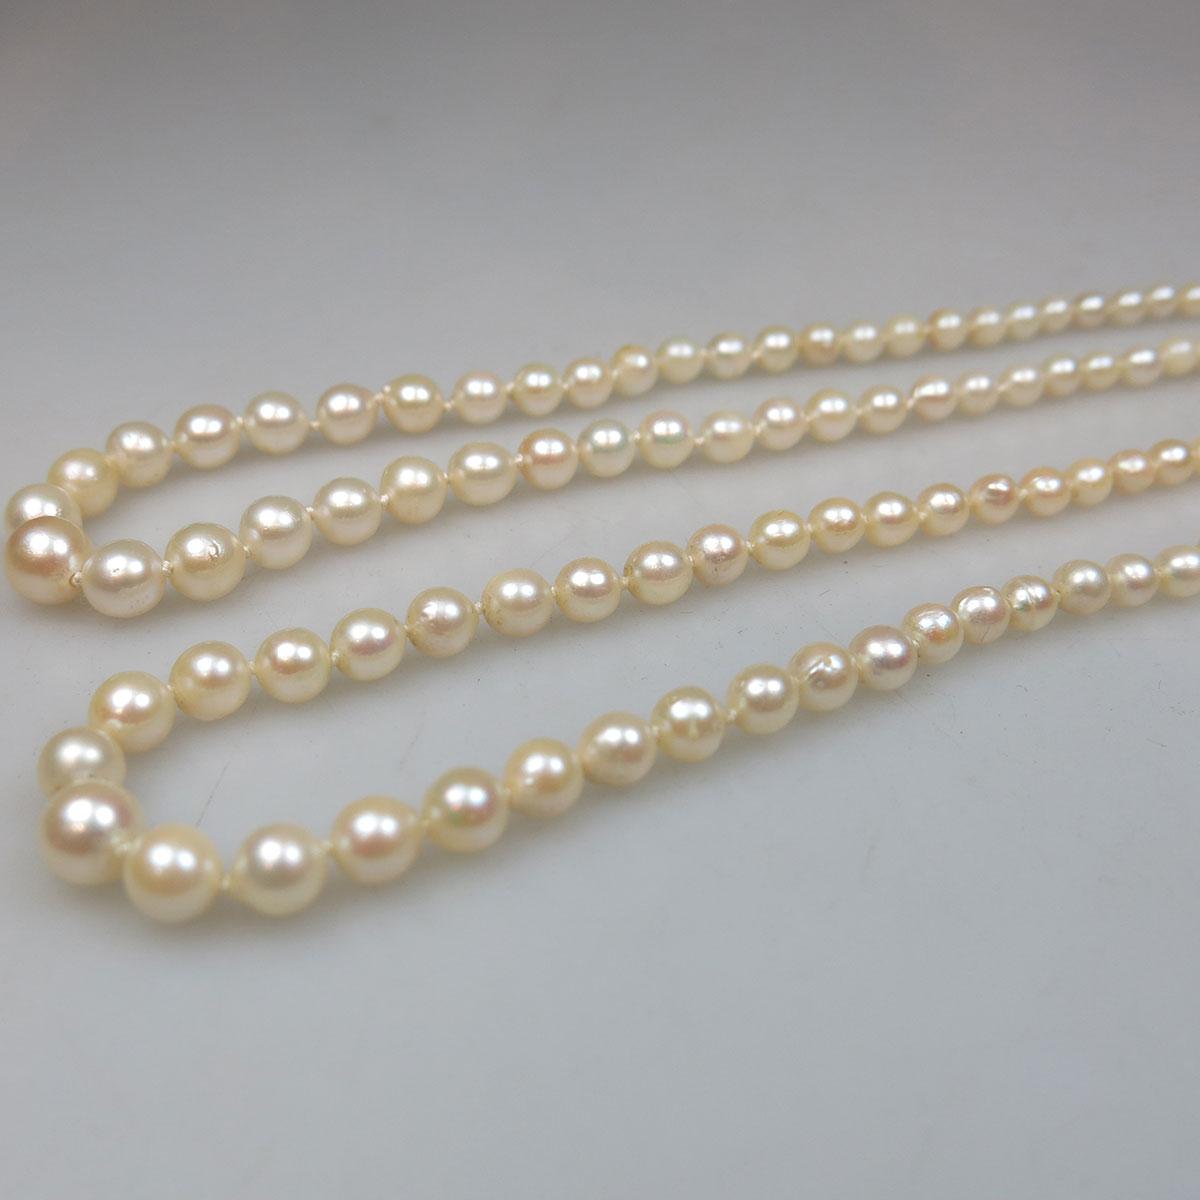 2 Single Graduated Strands Of Cultured Pearls